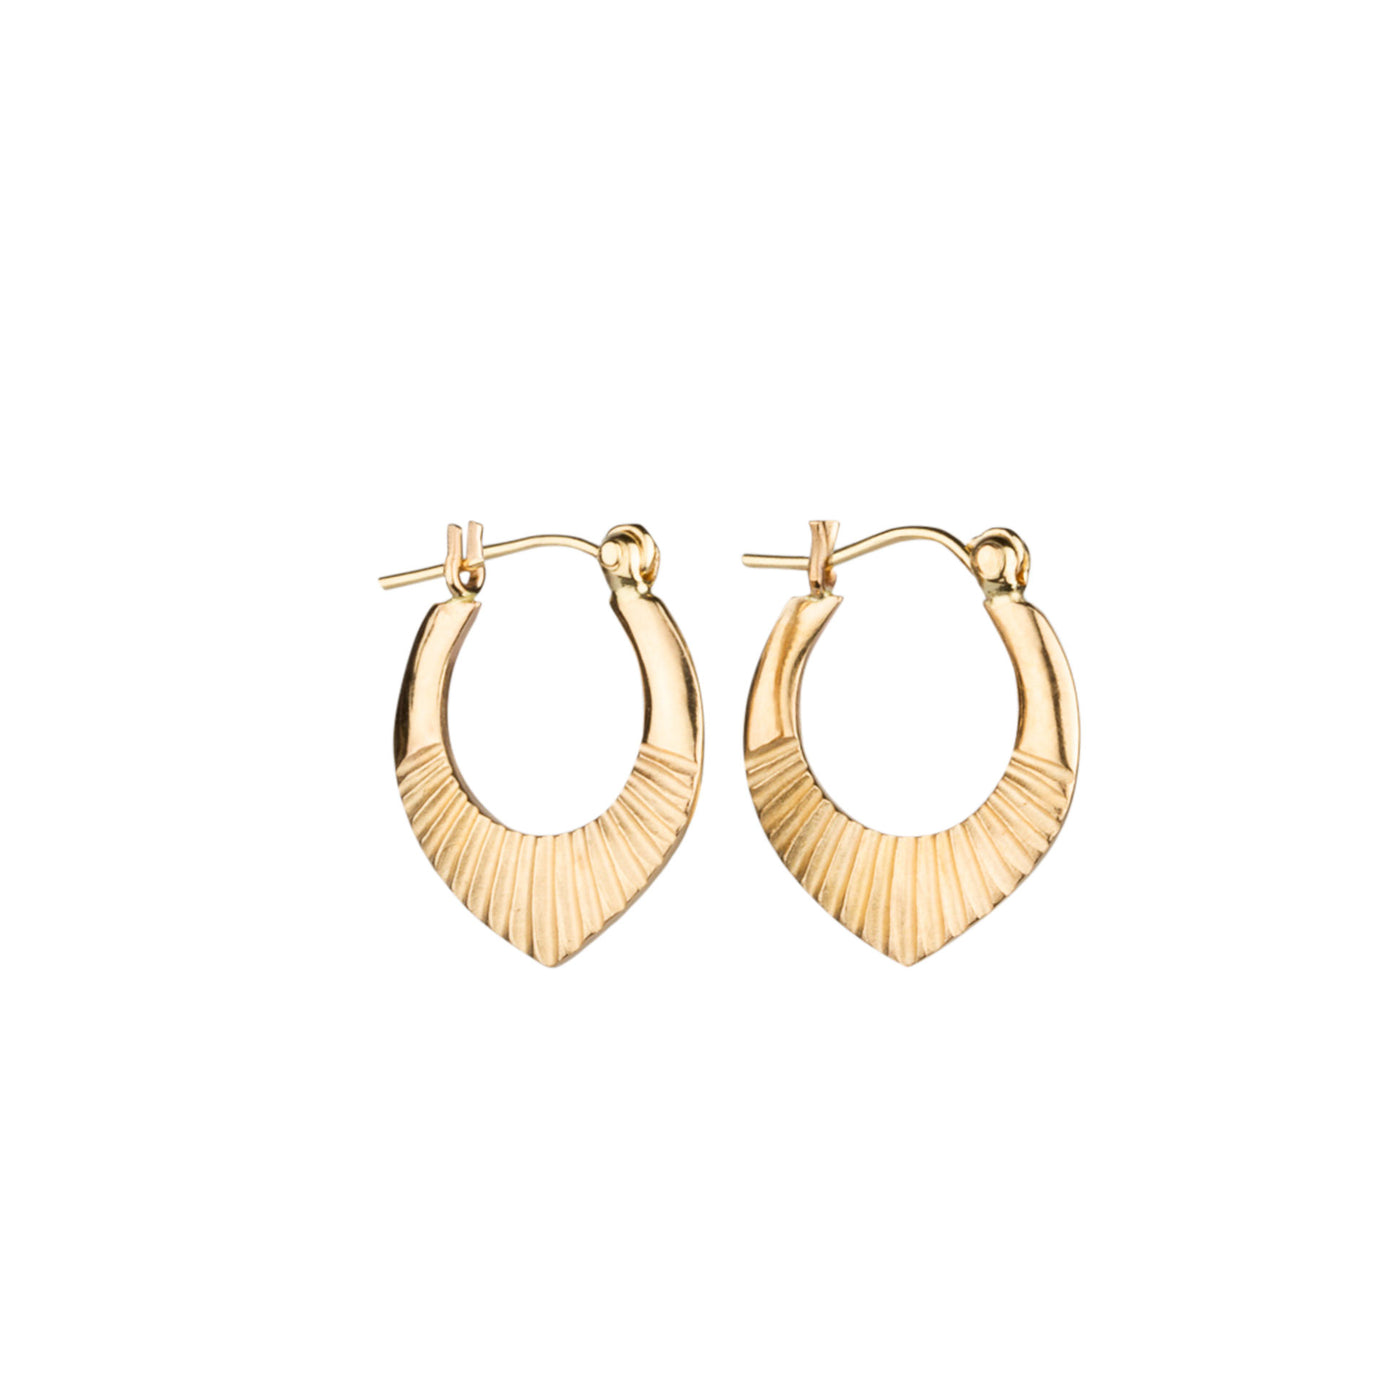 14k yellow gold hinged hoop earrings with carved sunburst motif on a white background